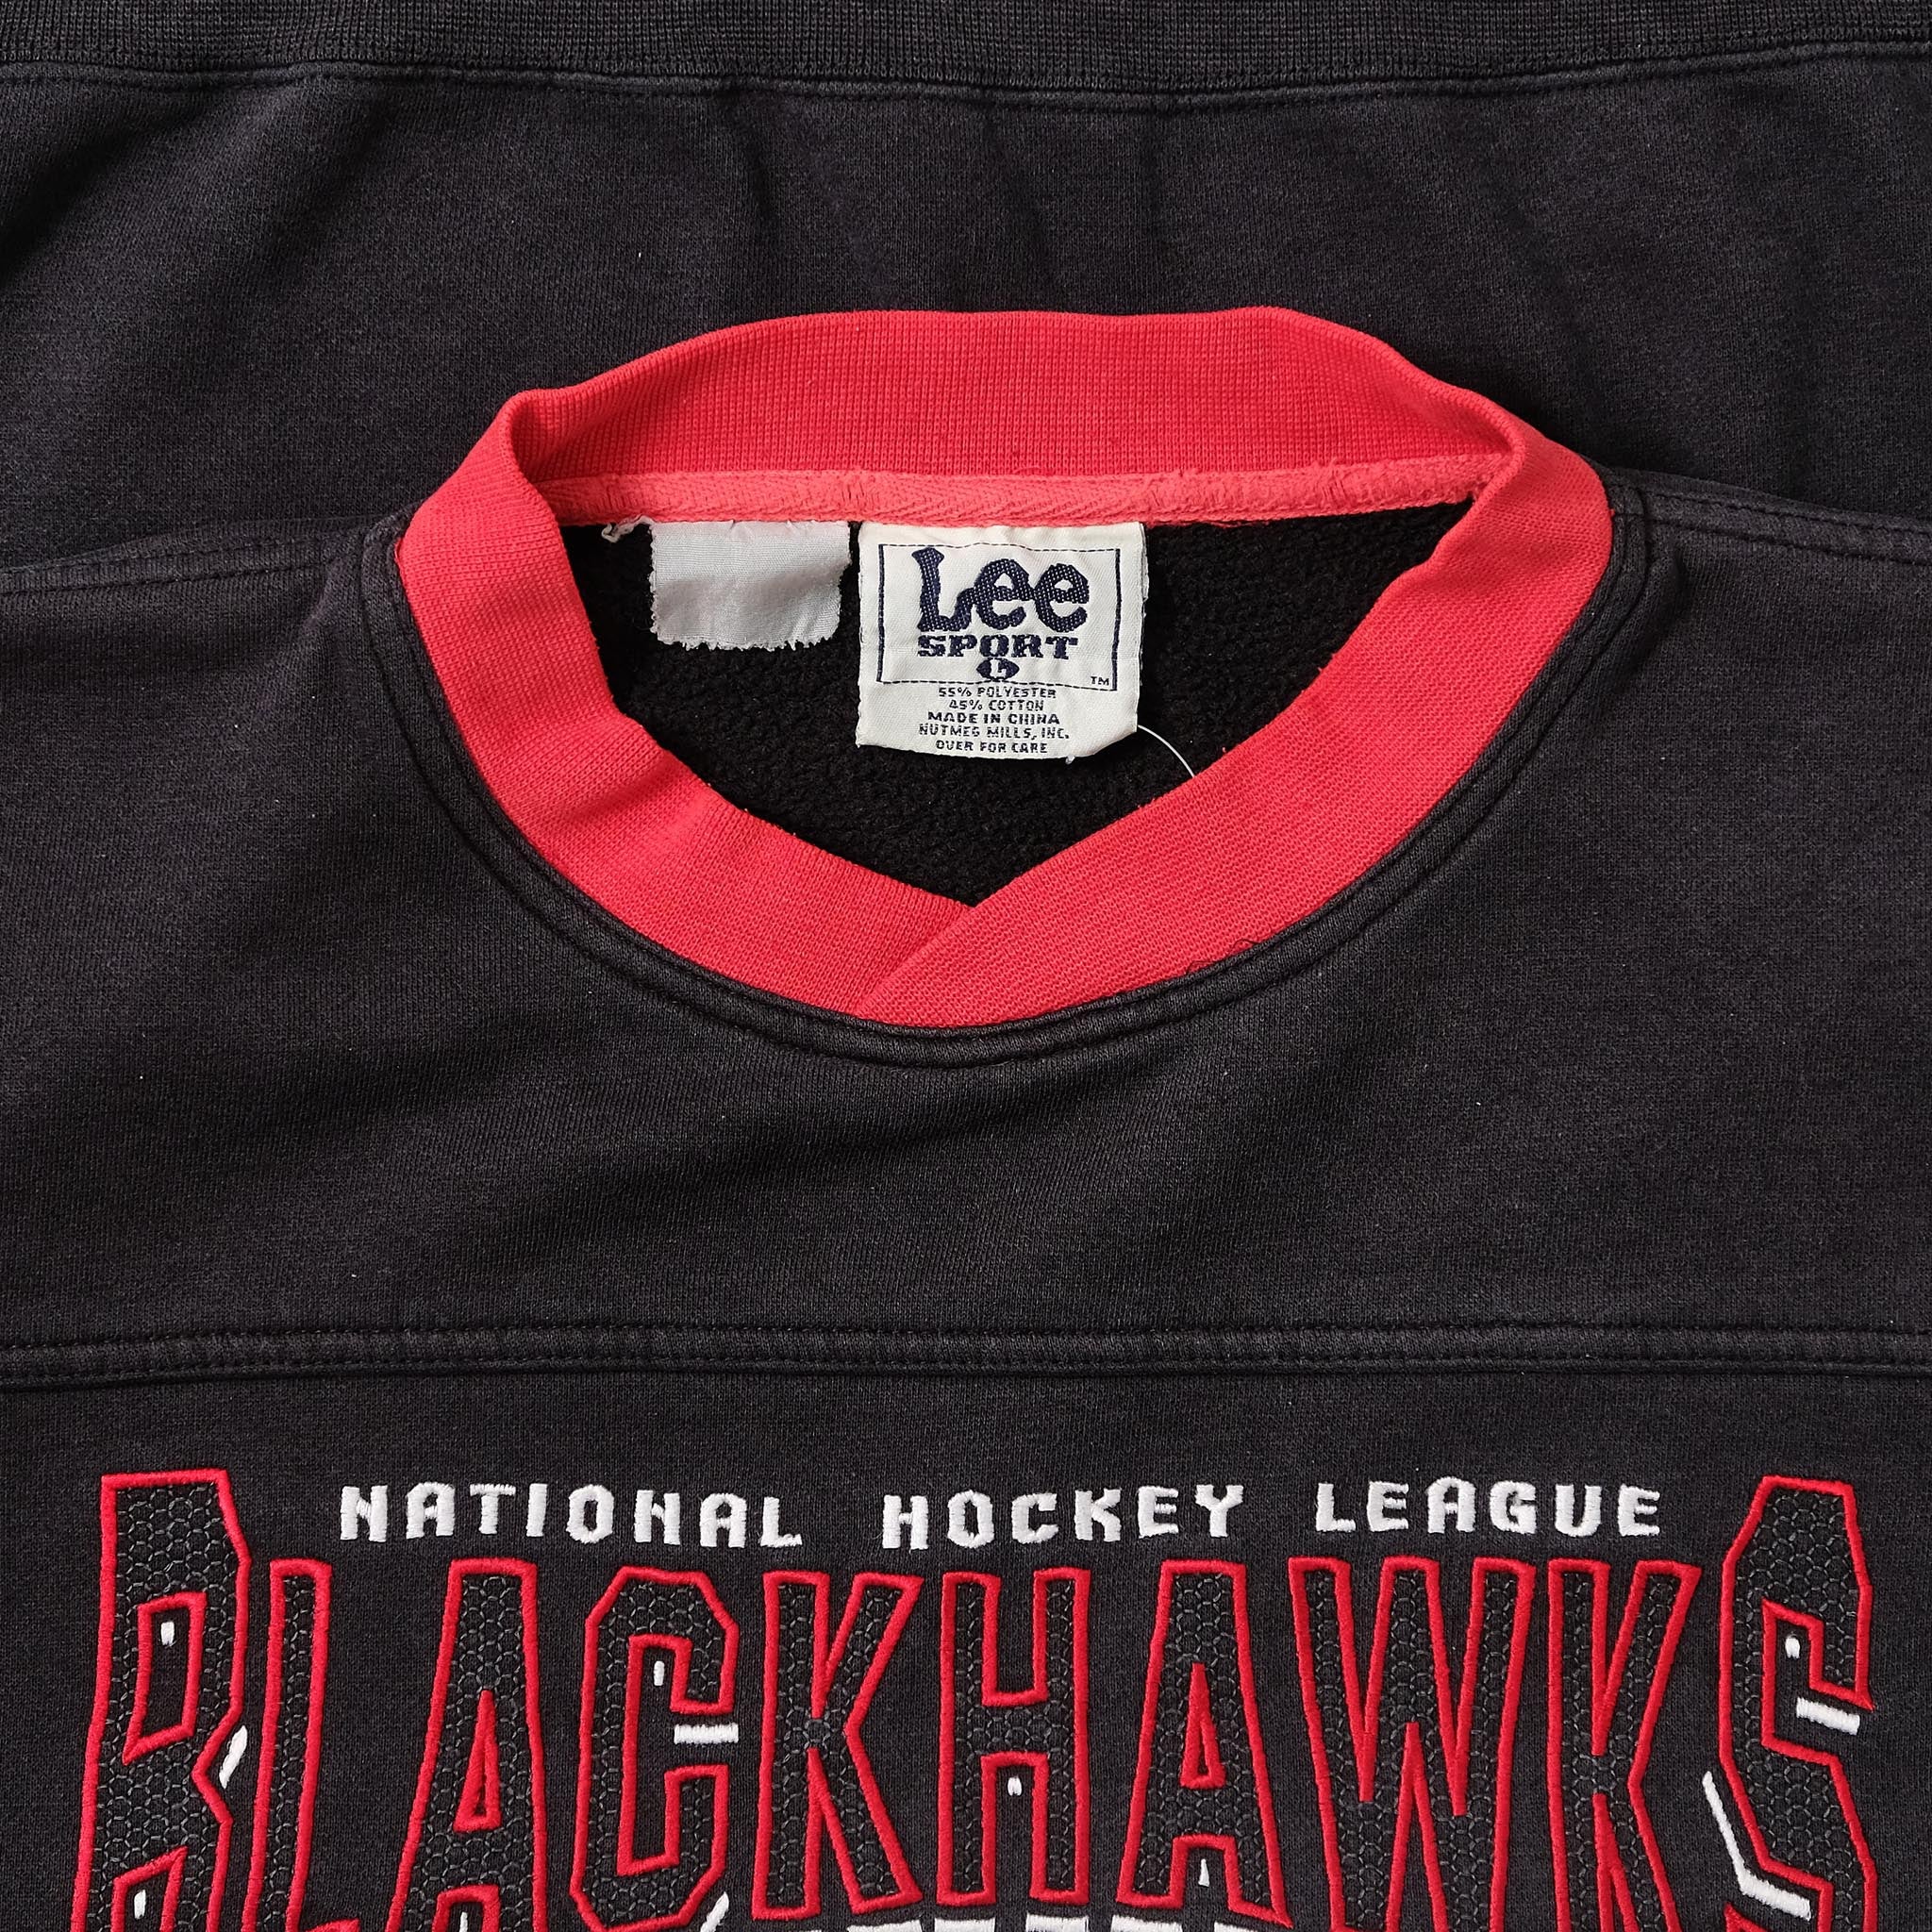  Chicago Blackhawks 1960-61 Classic Heritage Knit Sweater  by CCM